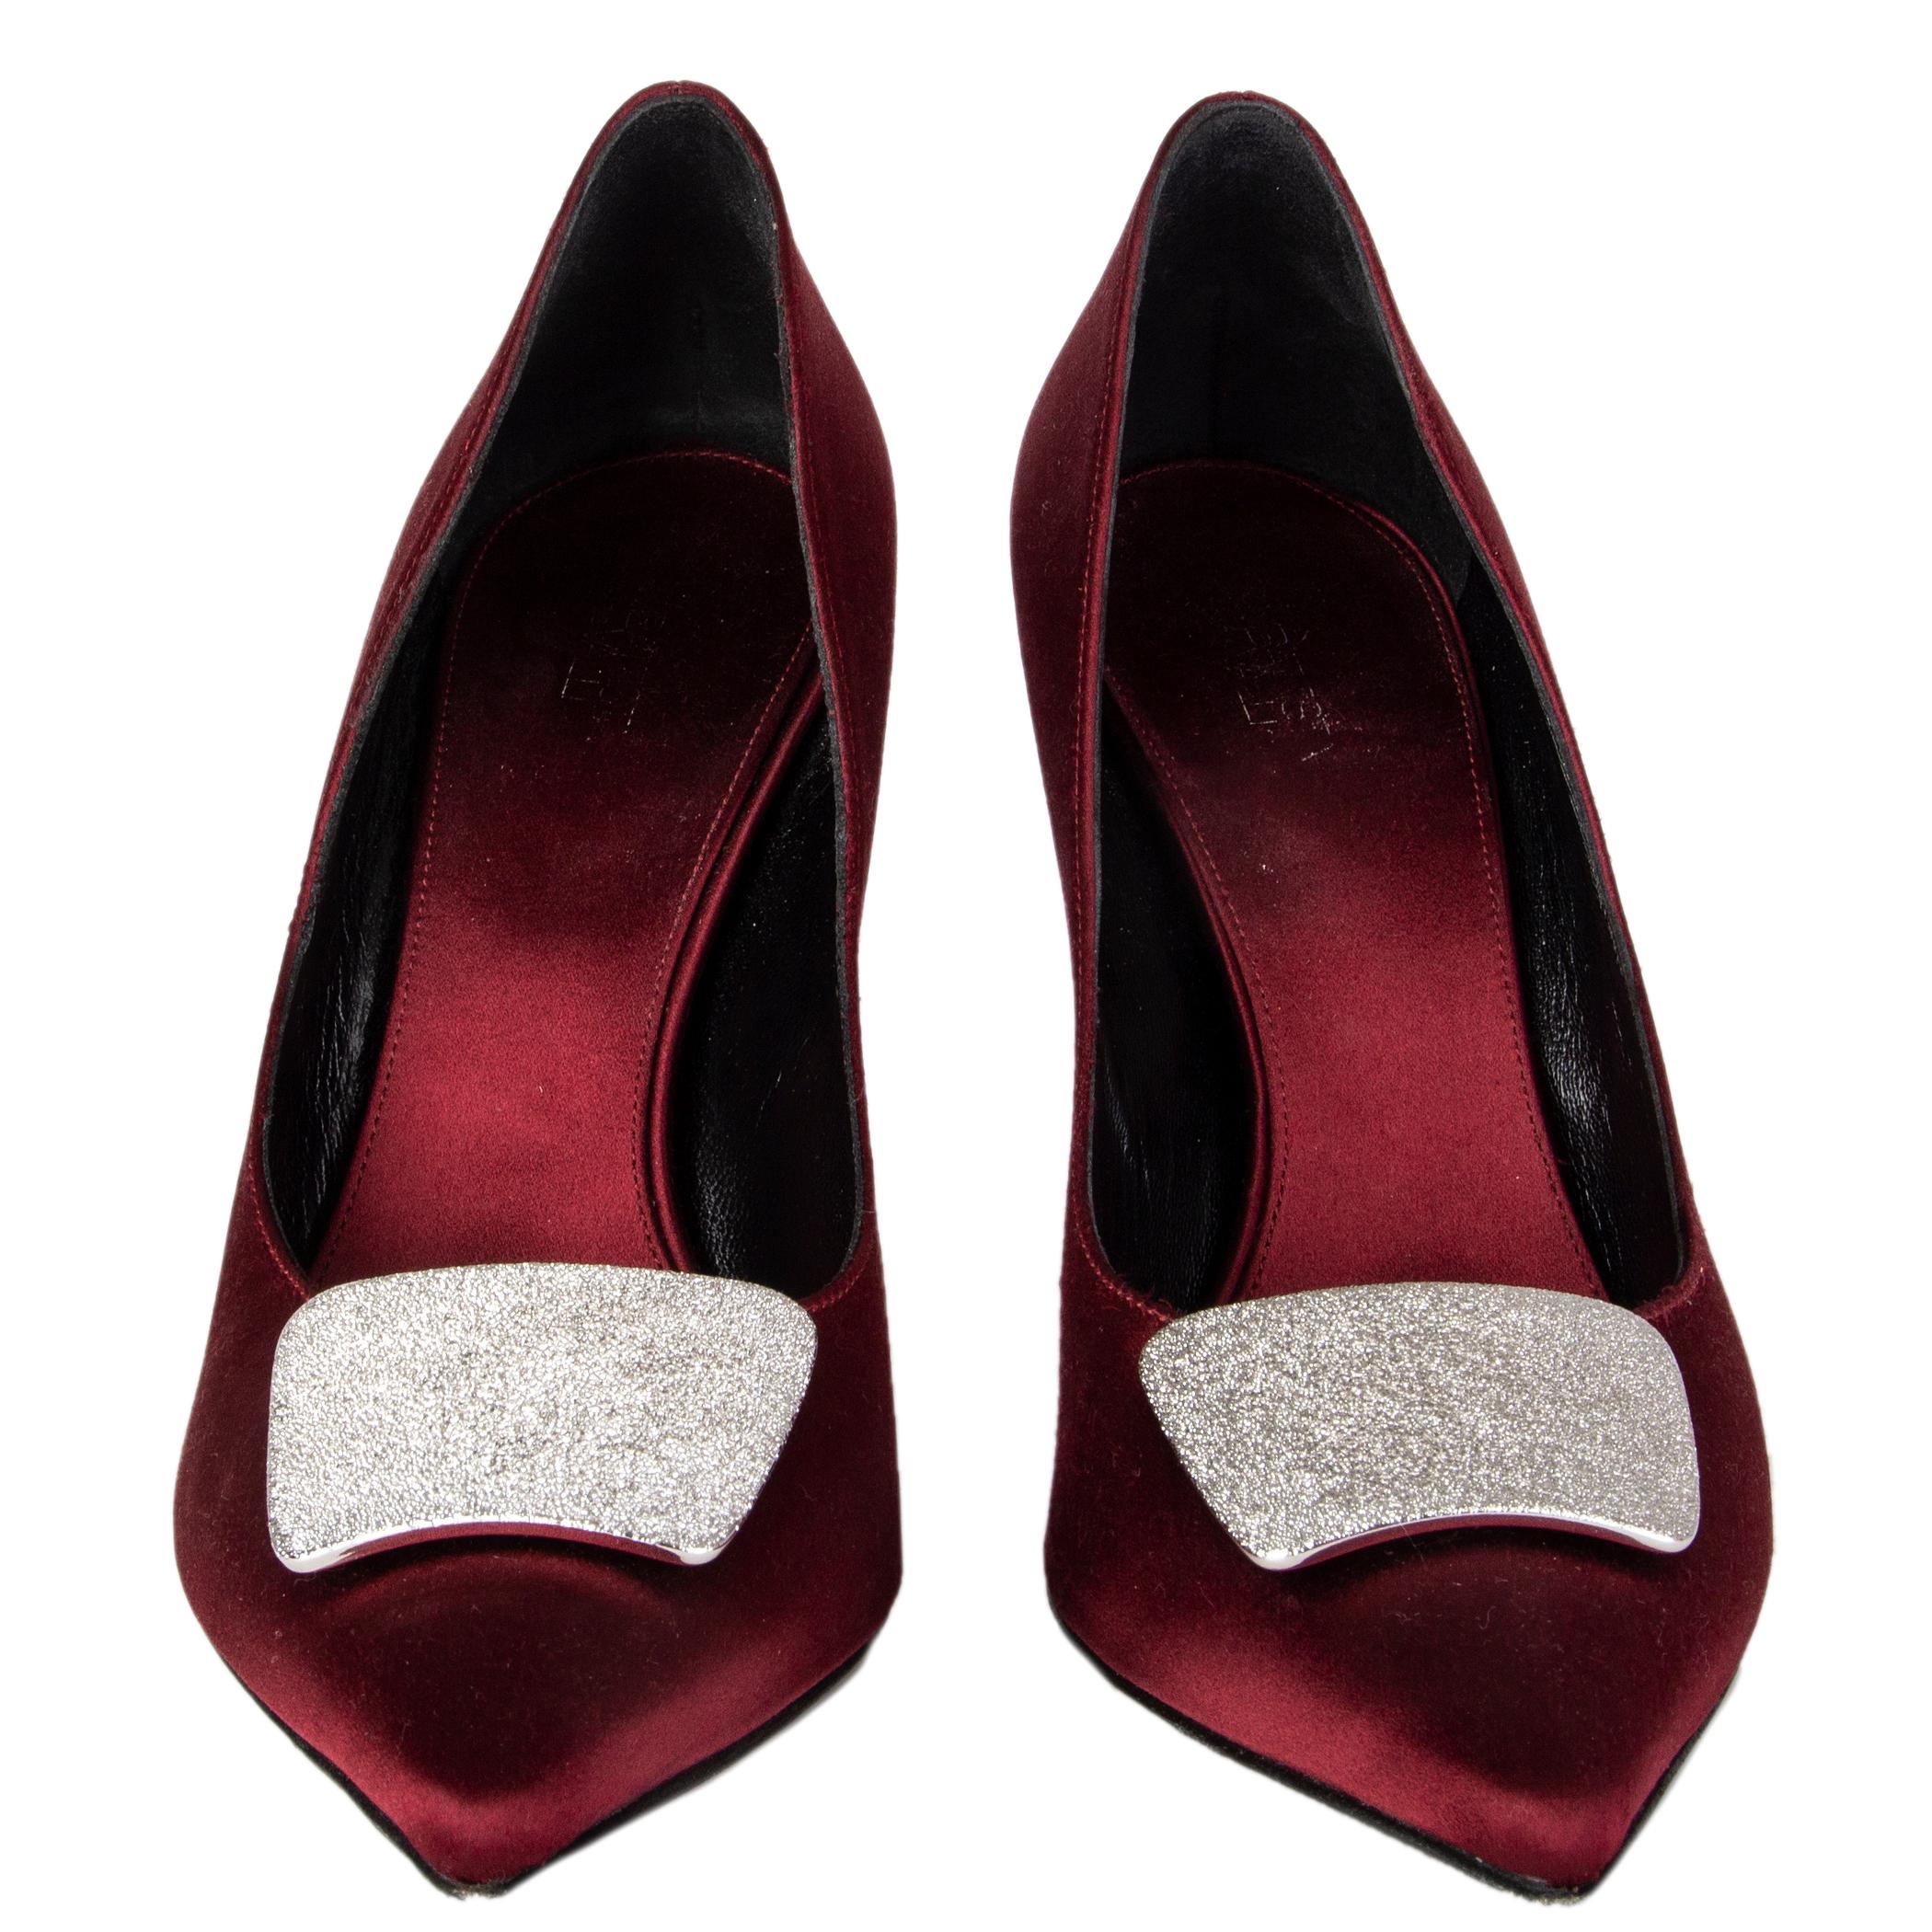 100% authentic Giambattista Valli pointed-toe pumps in burgundy satin with glitter metal plate detail. Have been worn and are in excellent condition. 

Measurements
Imprinted Size	38
Shoe Size	38
Inside Sole	24.5cm (9.6in)
Width	7.5cm